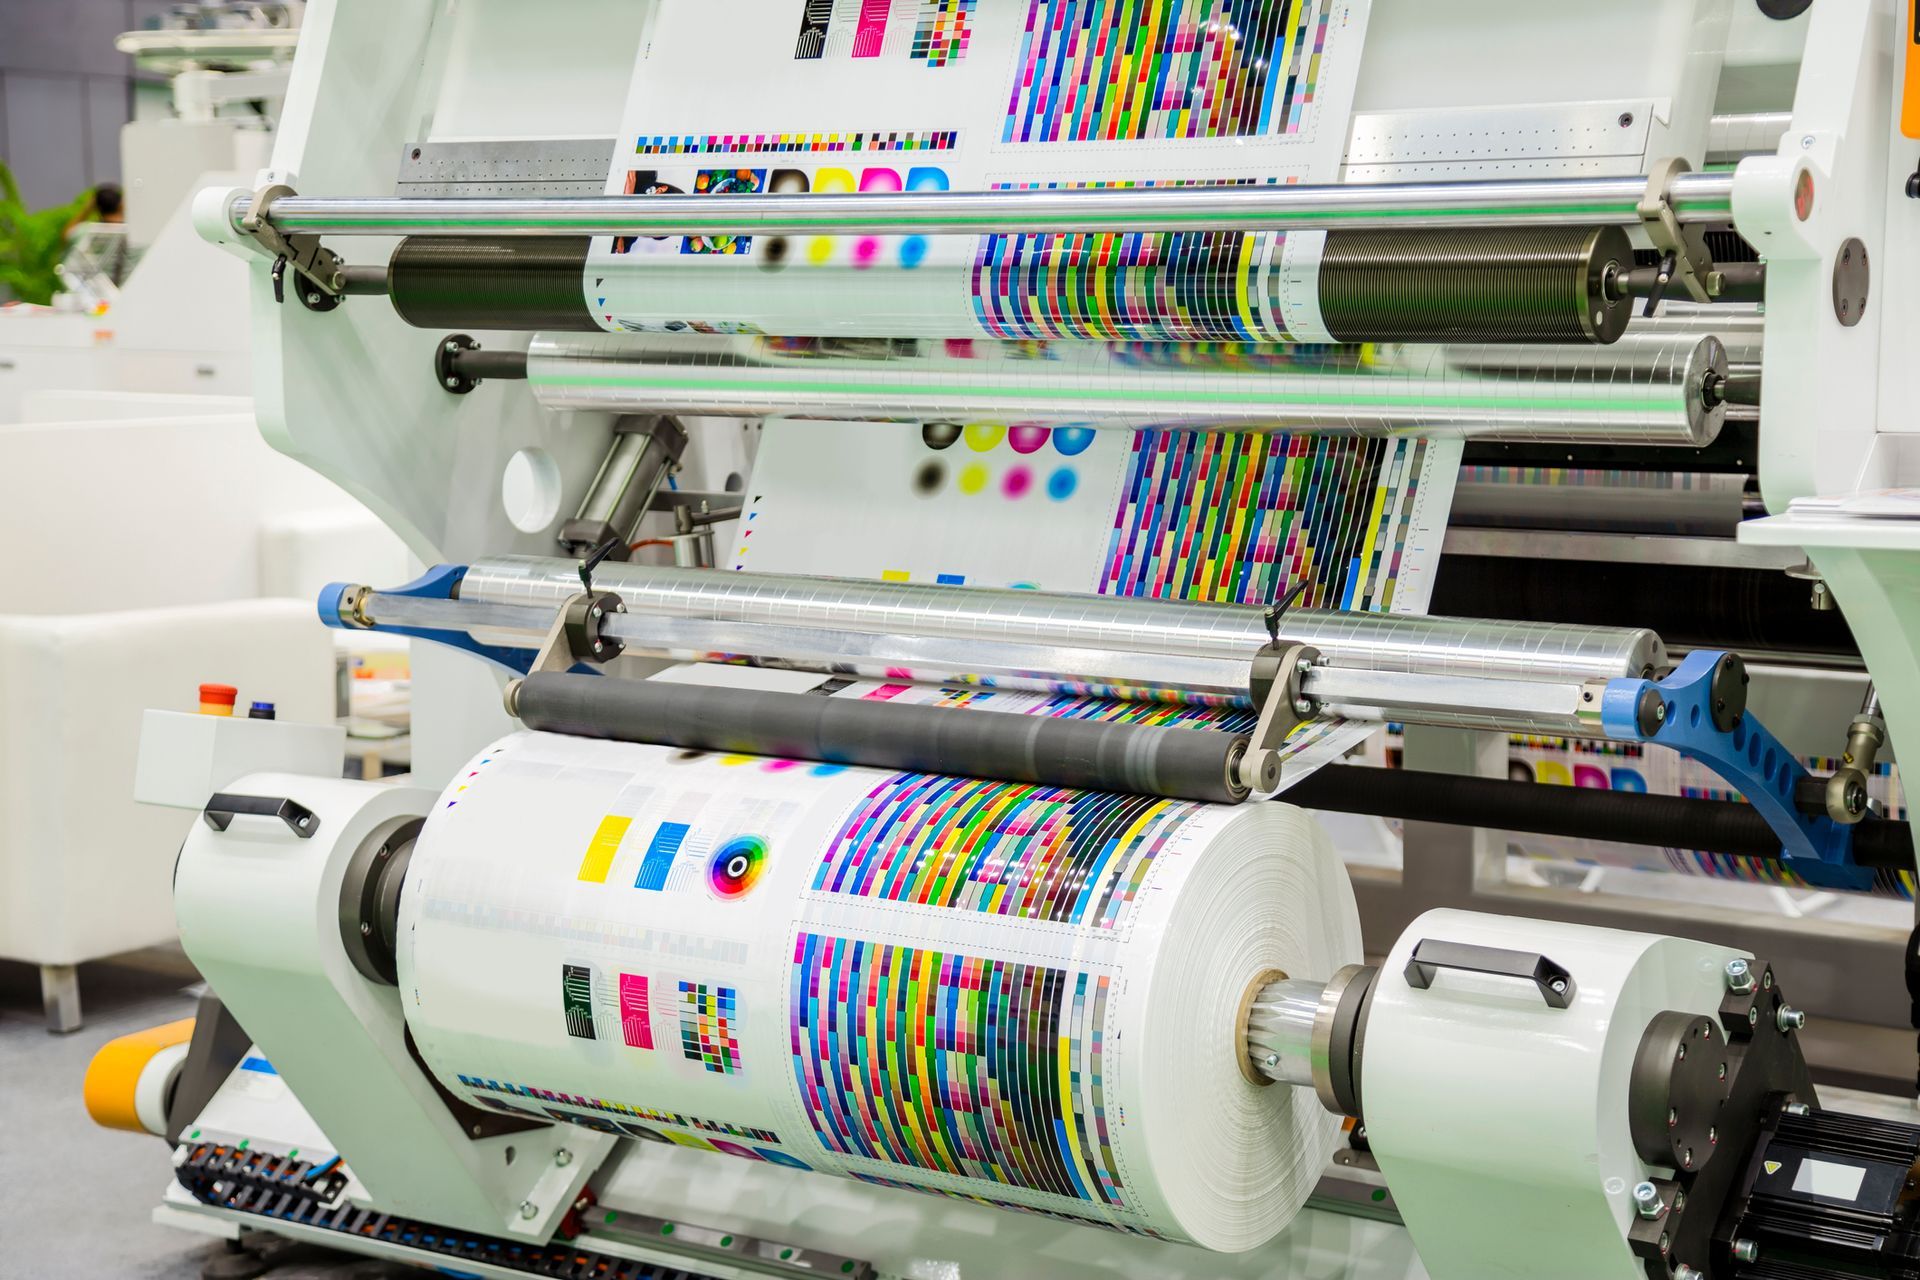 Best Digital Printing For Business in West Covina, CA